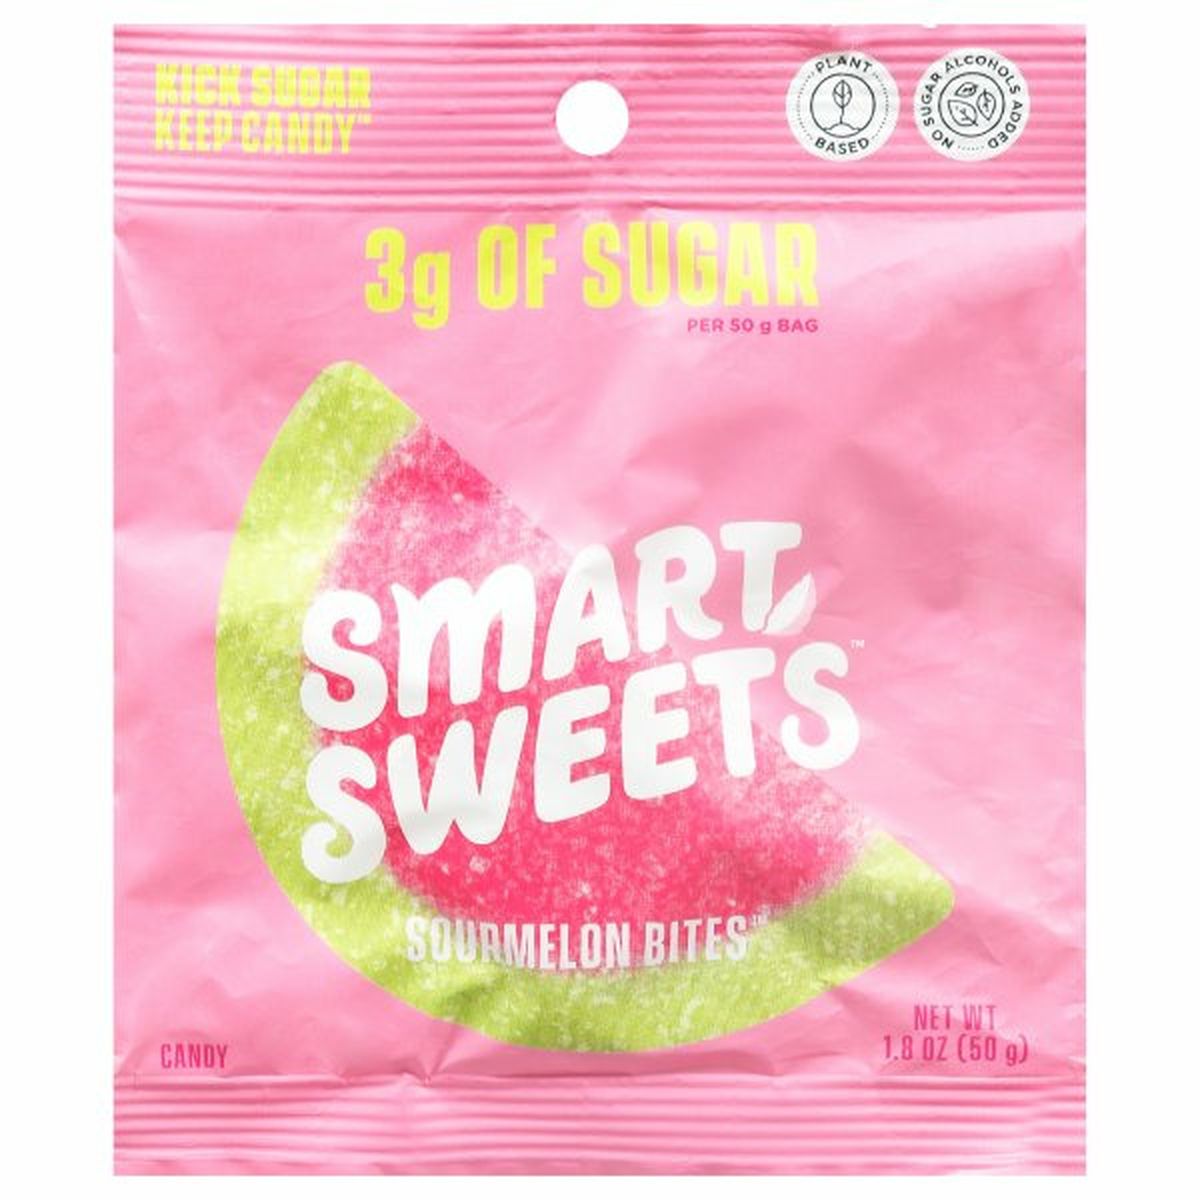 Calories in SmartSweets Candy, Sourmelon Bites